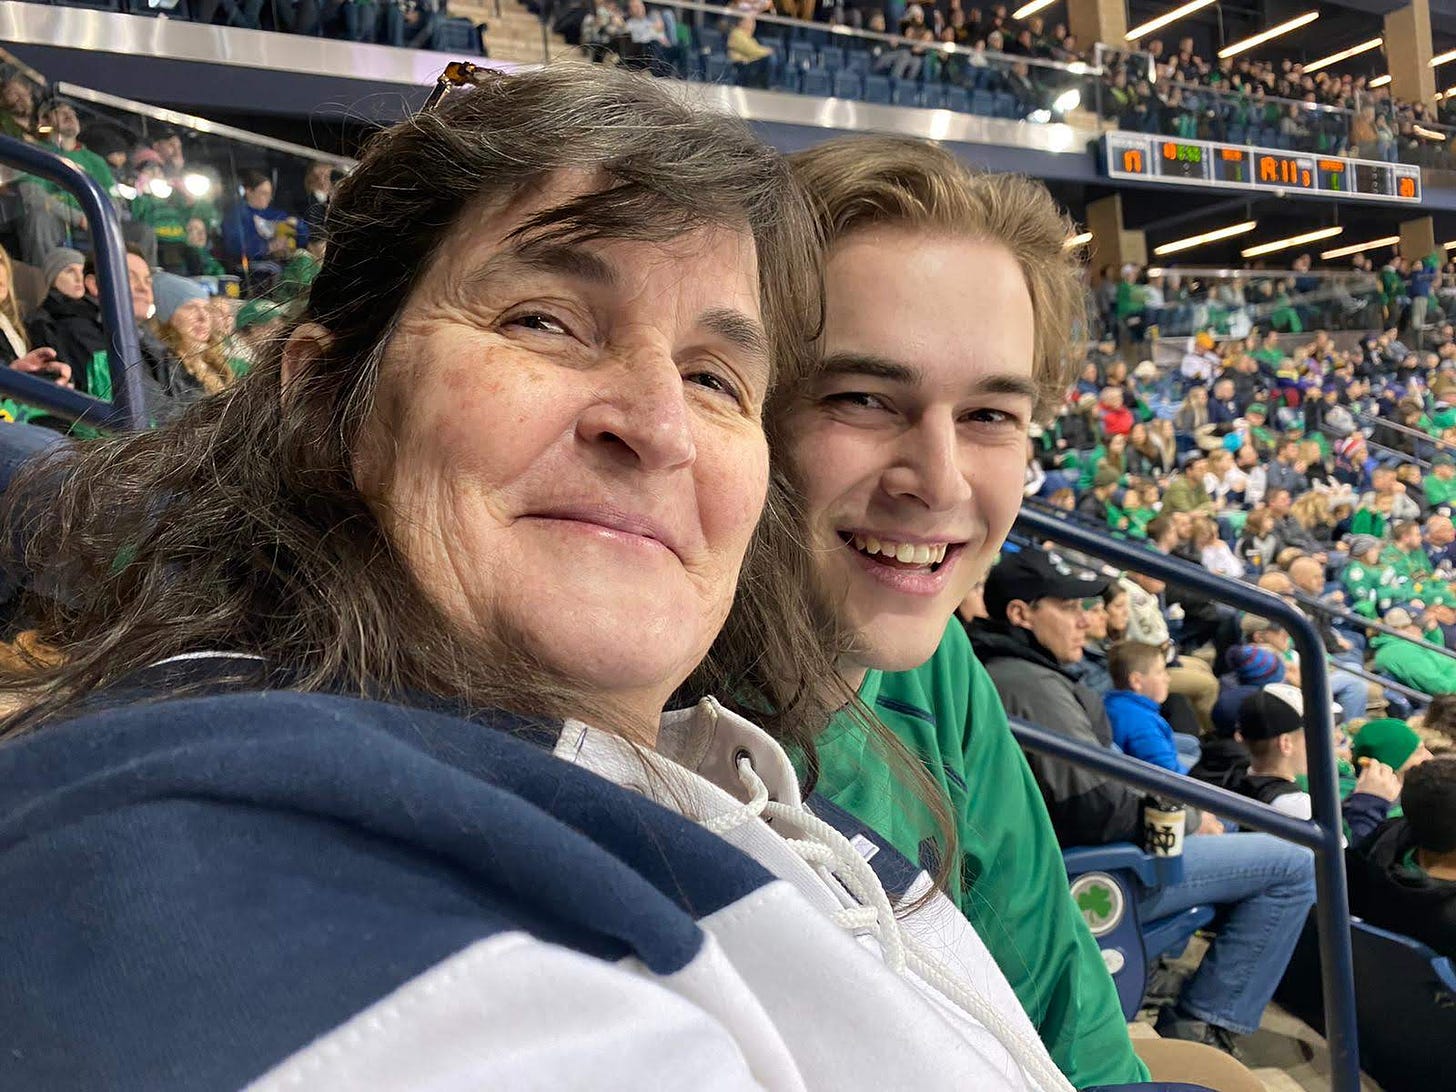 Ben and mom take in a Notre Dame hockey game